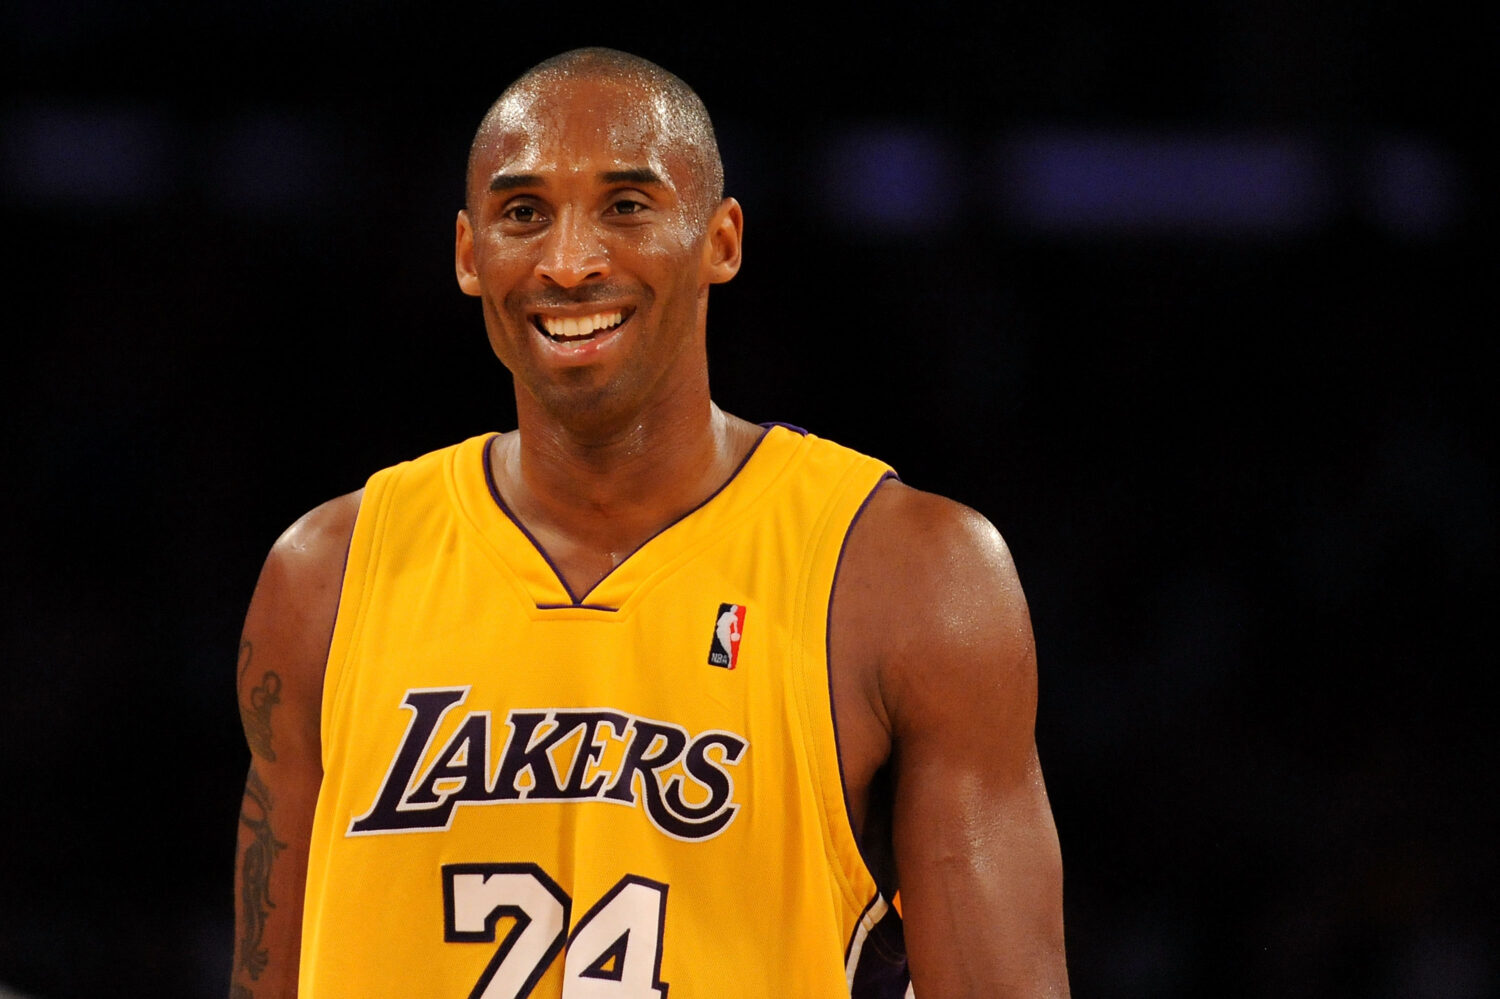 These are the BEST Kobe Bryant Sneakers 